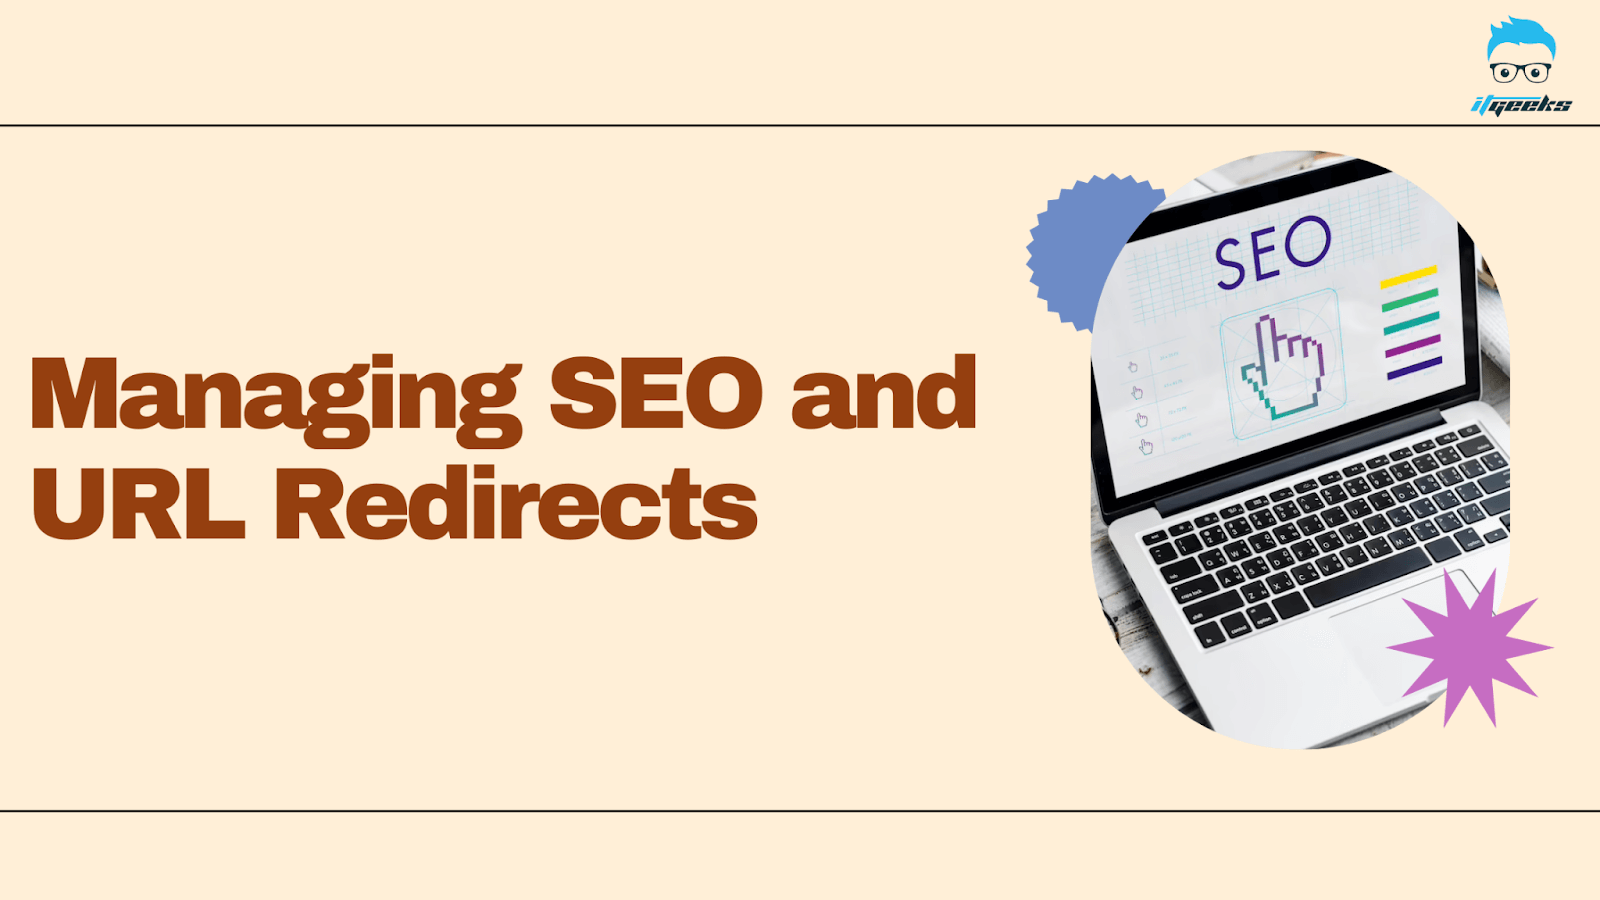 Managing SEO and URL Redirects